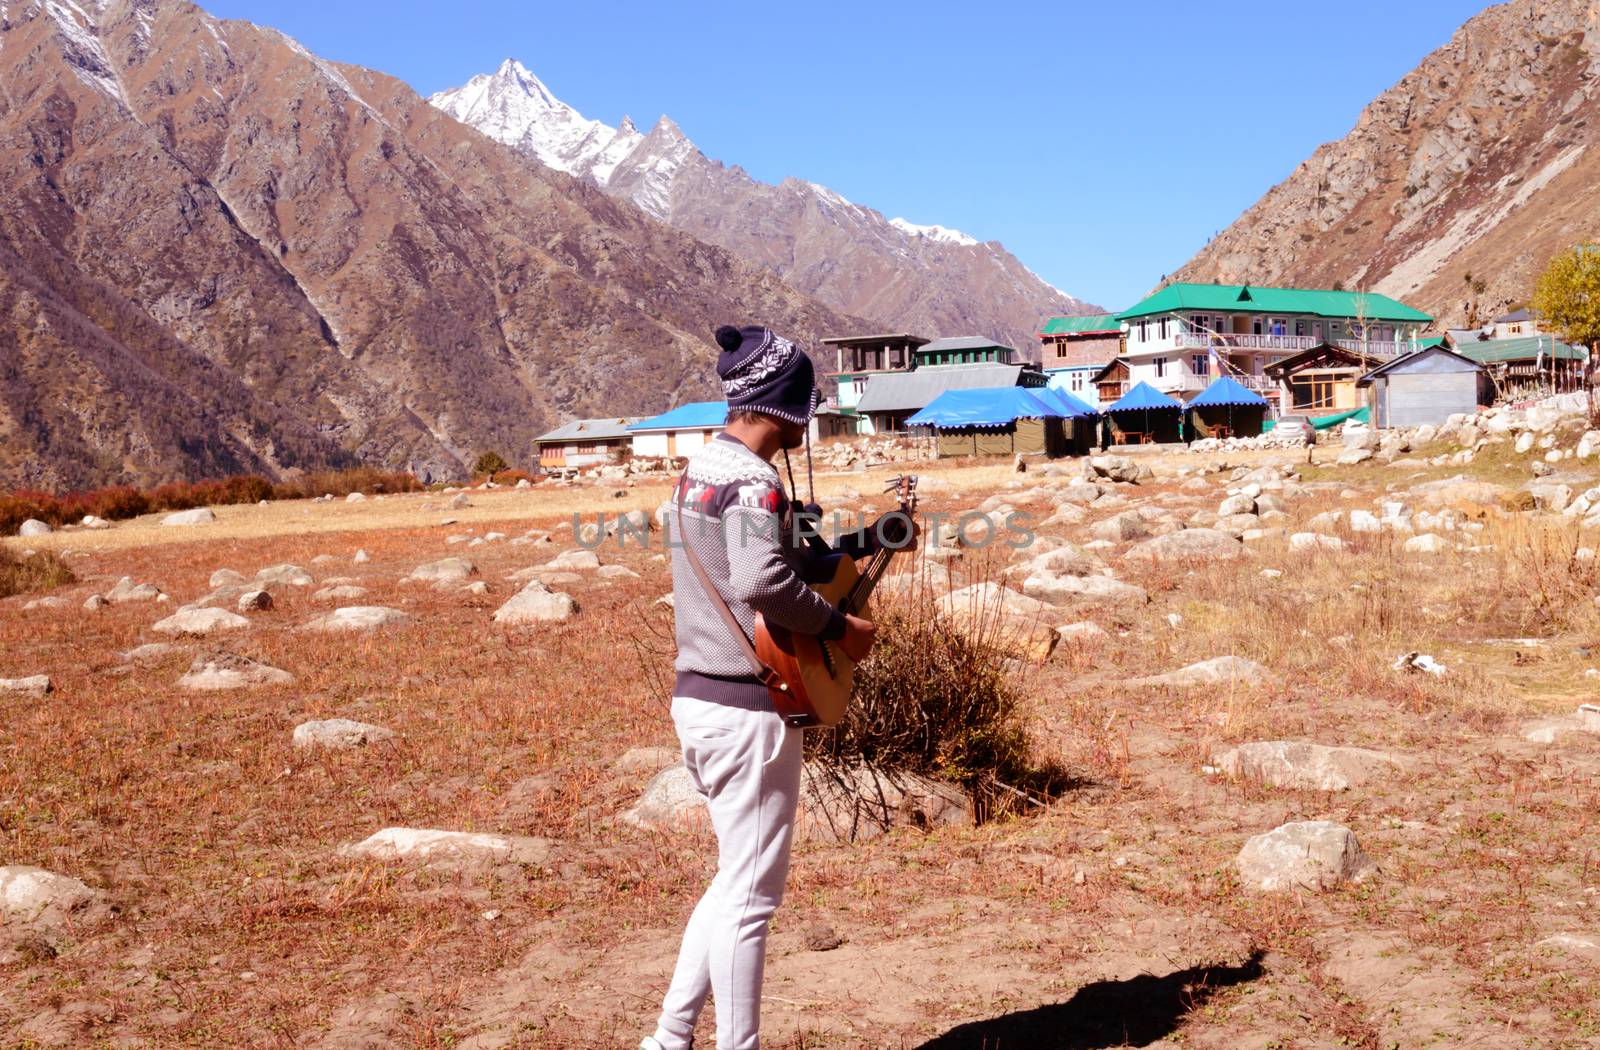 A solo traveler hobbyist musician playing guitar alone in the silence of Himalayan mountain valley and sound of guitar strings. Summer music Inspiring environment in outdoors. Sangla India South Asia. by sudiptabhowmick